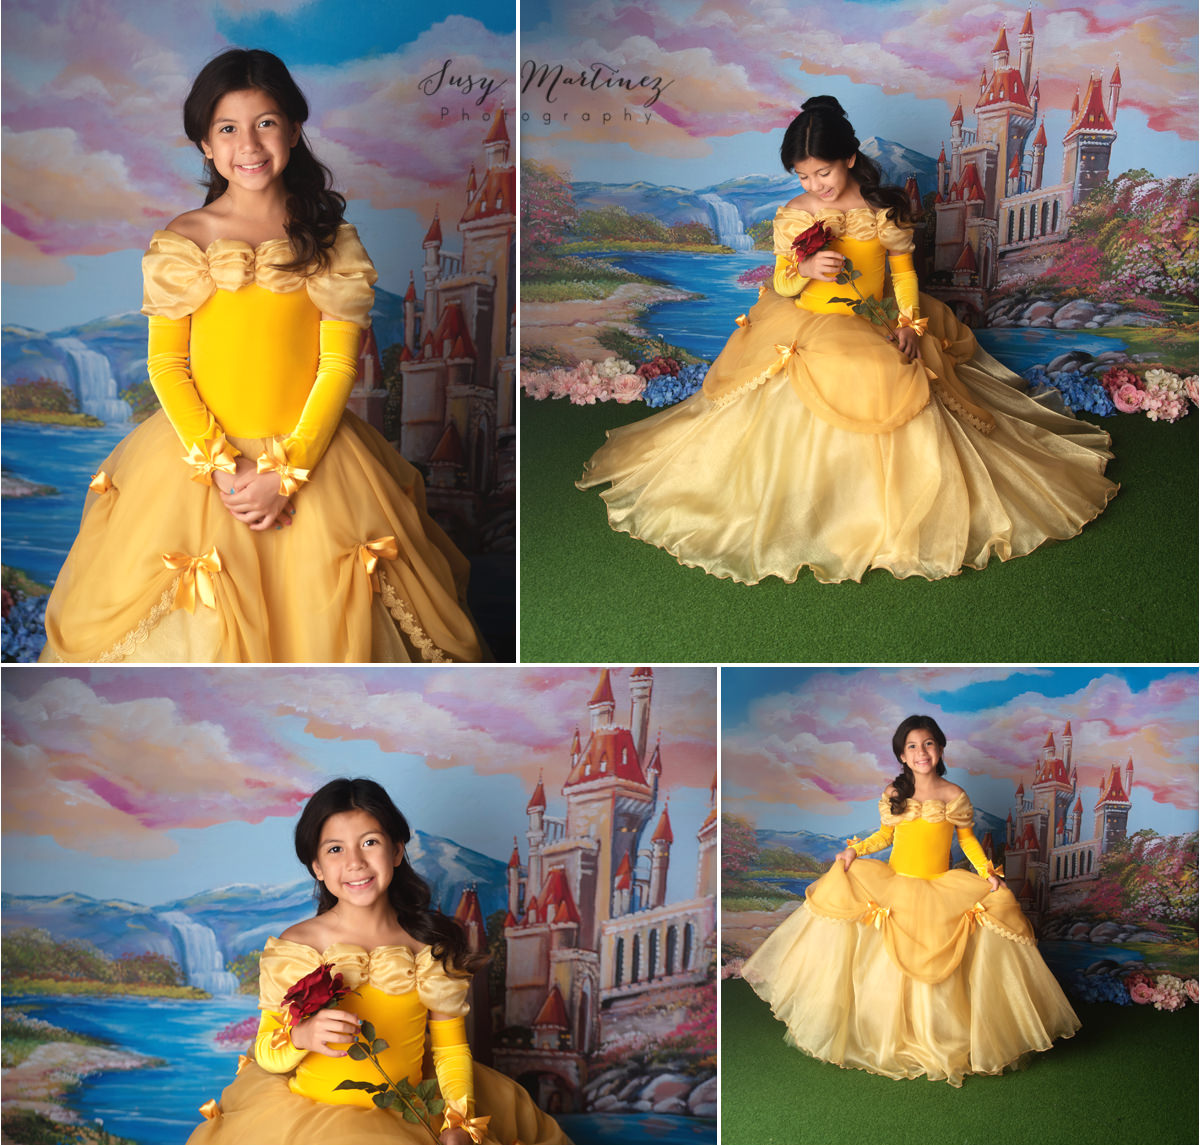 Beauty and the Beast princess mini sessions with Susy Martinez Photography